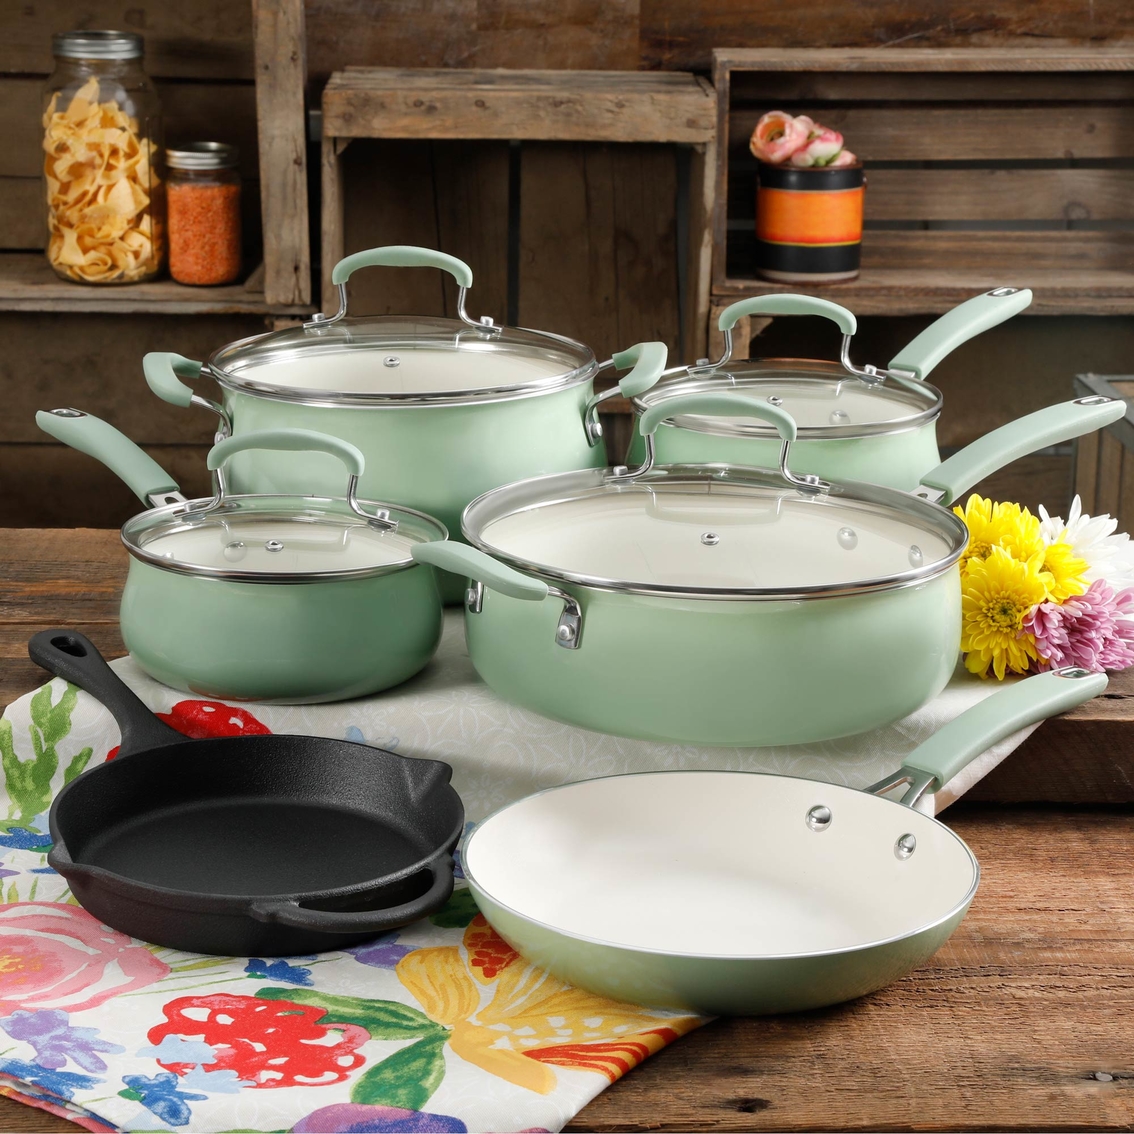 Pioneer Woman Classic Belly Gradient Cookware 10 pc. Set - Image 10 of 10